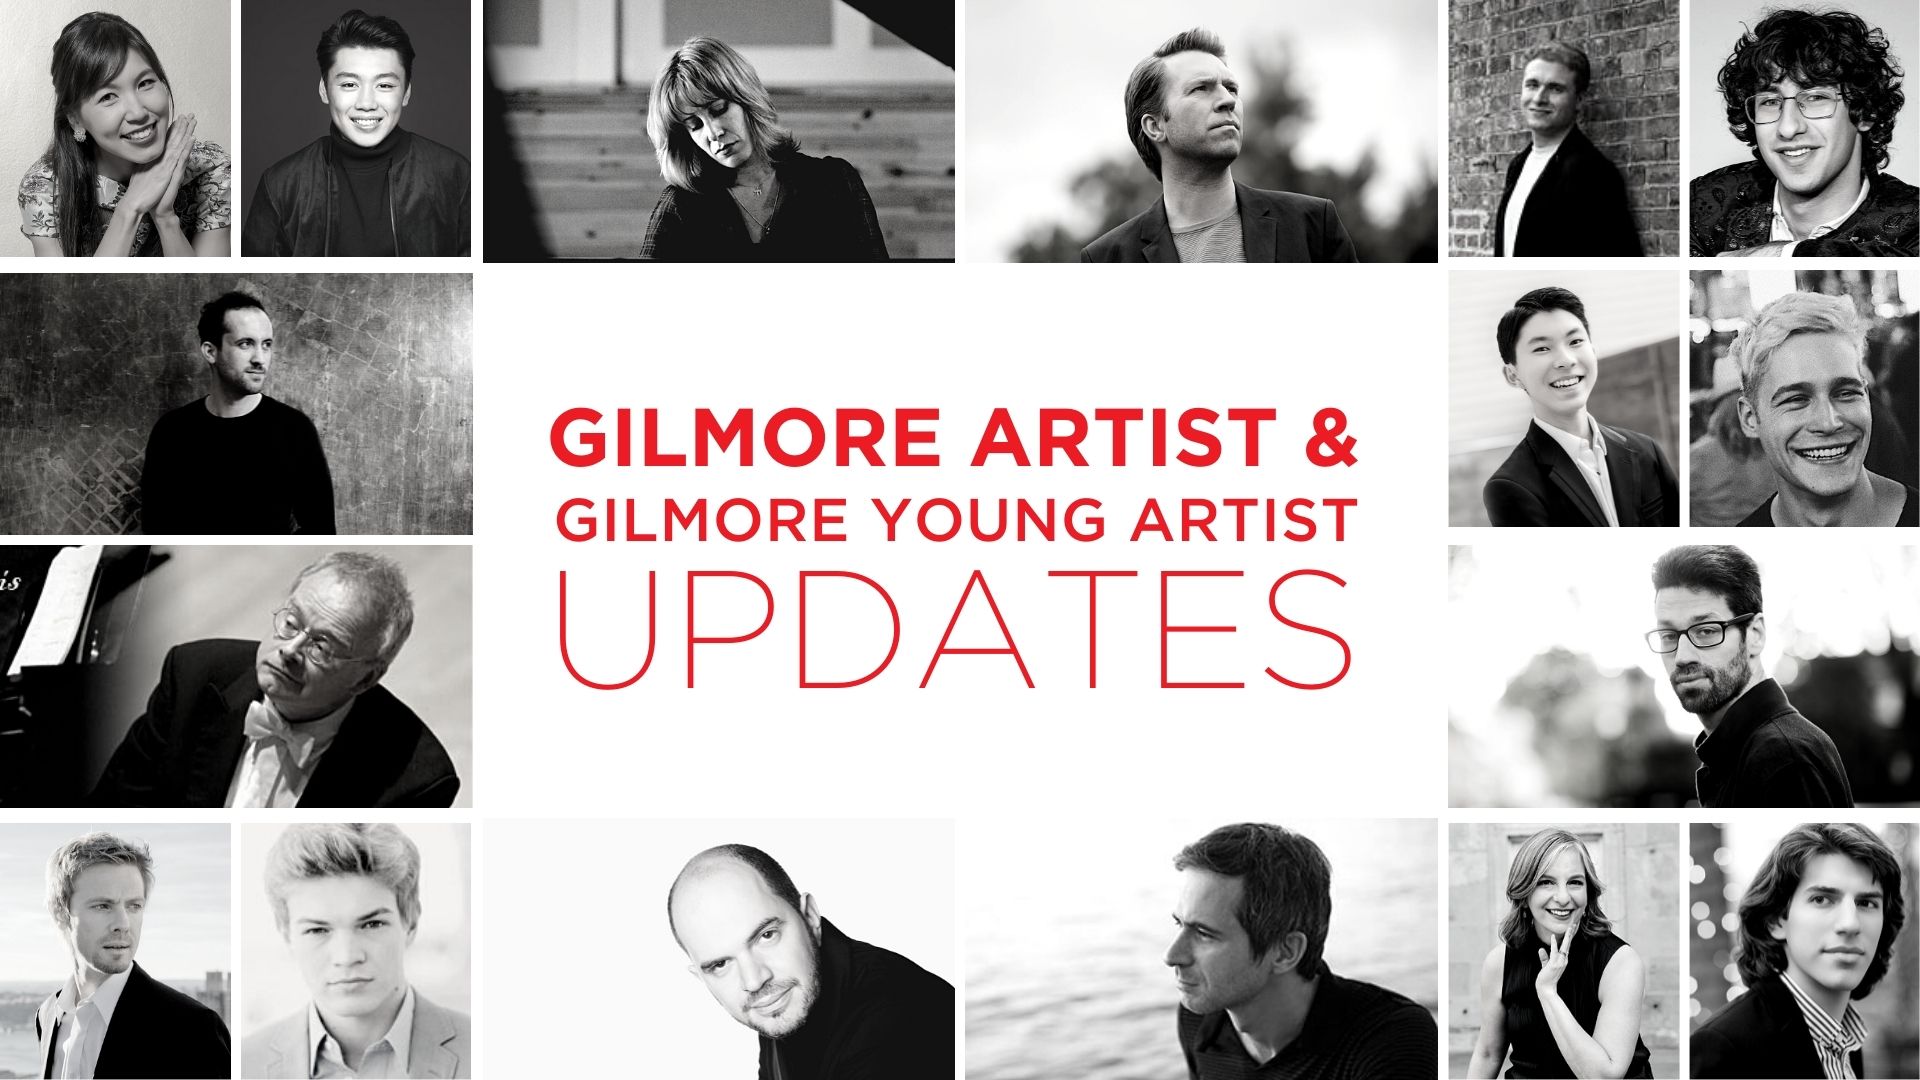 Gilmore Artist & Gilmore Young Artist Updates images